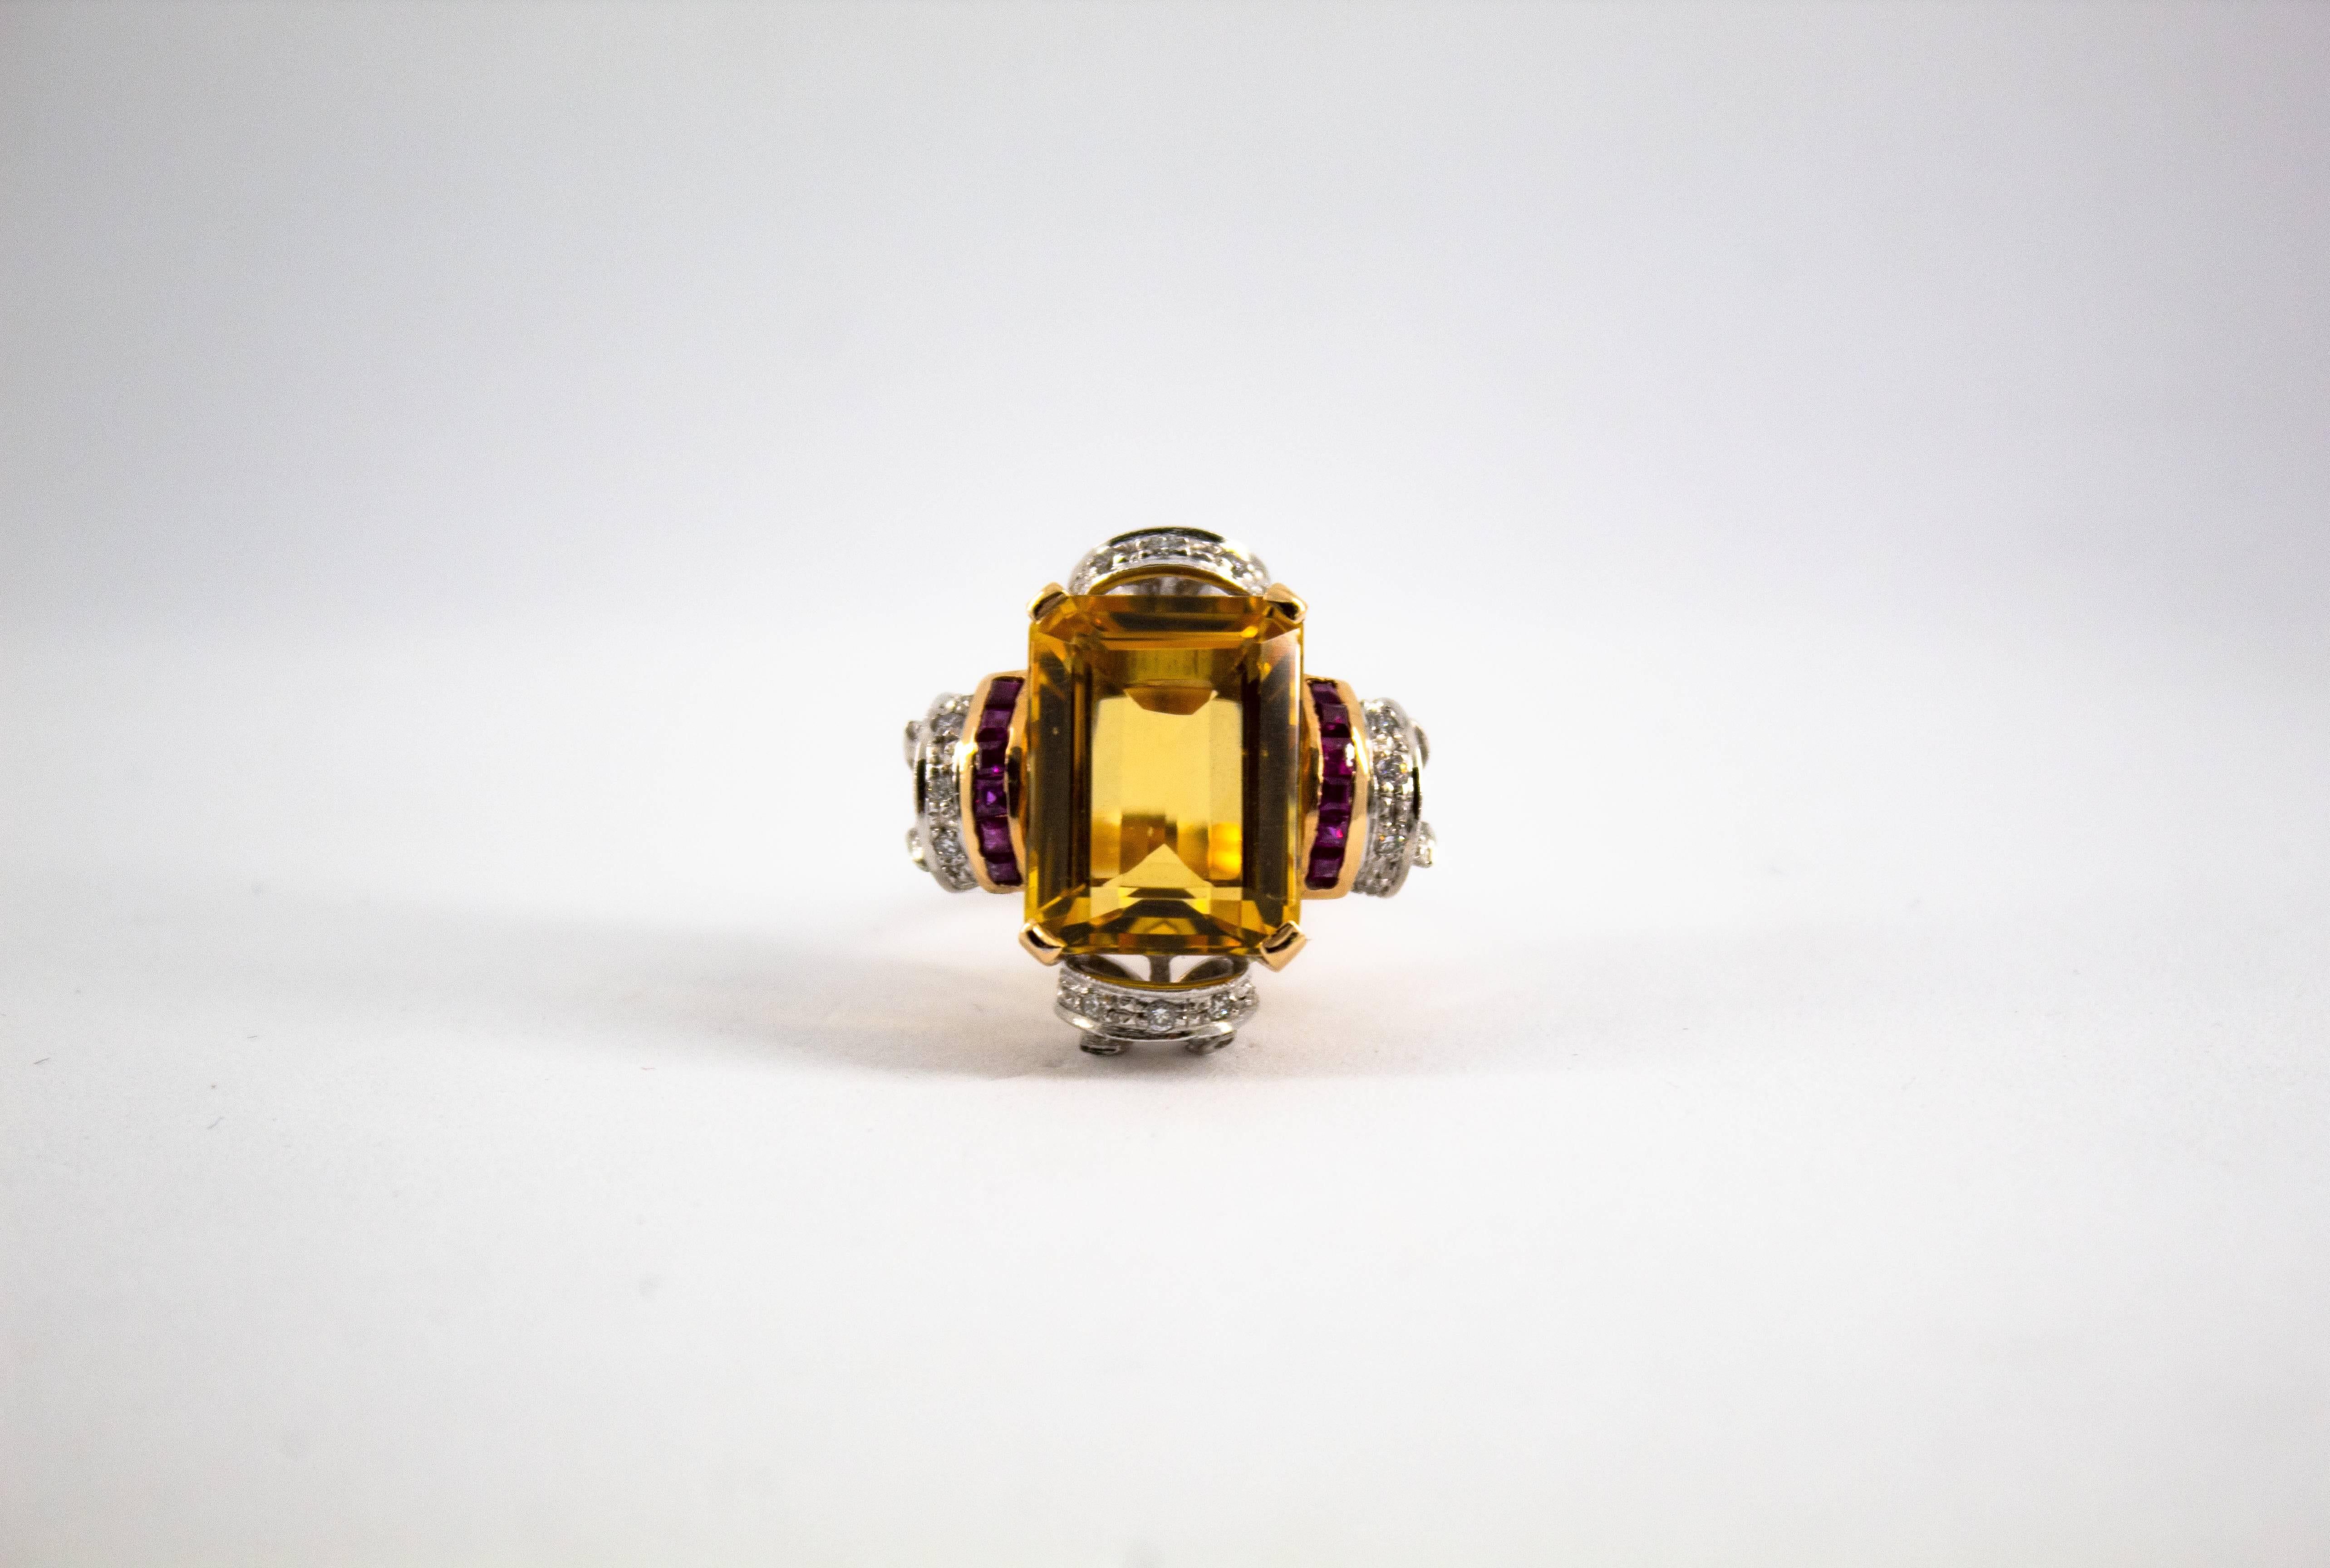 This Ring is made of 14K Yellow Gold.
This Ring has 0.15 Carats of Rubies.
This Ring has 0.40 Carats of Diamonds.
This Ring has a circa 11.5 Carats Citrine (16.2mm x 12.1mm x 5.0mm).
Size ITA: 12 USA: 6 1/4
We're a workshop so every piece is